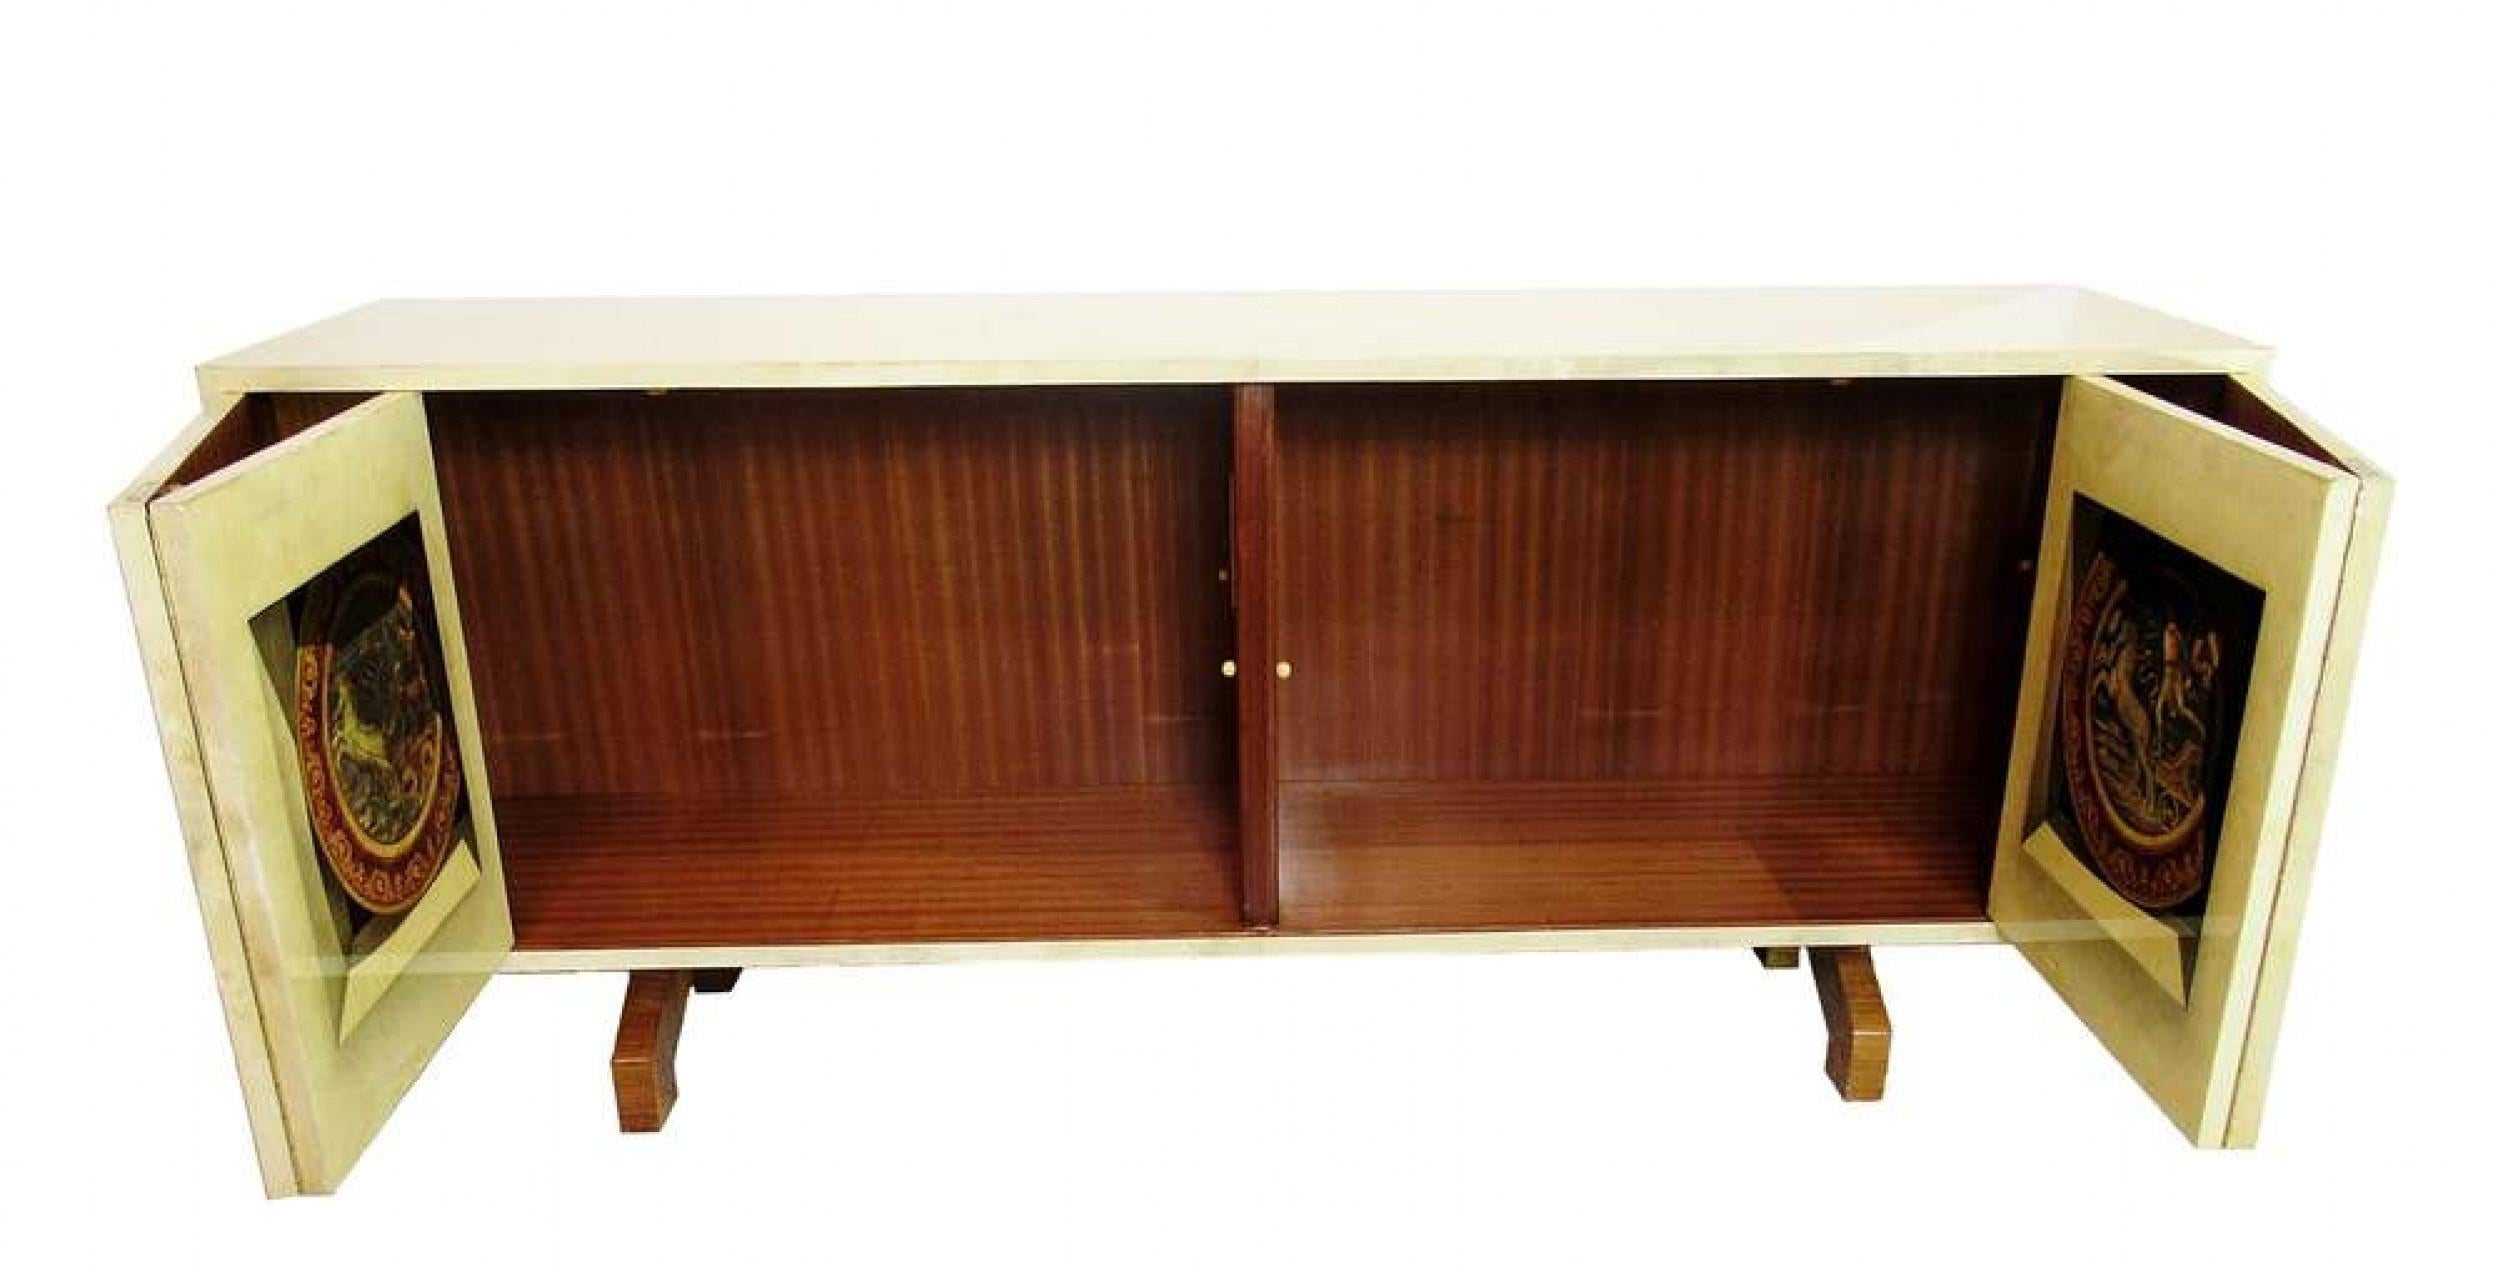 Aldo Tura Italian Modern Parchment, Palisander and Trompe L'oeil Credenza In Good Condition For Sale In New York, NY